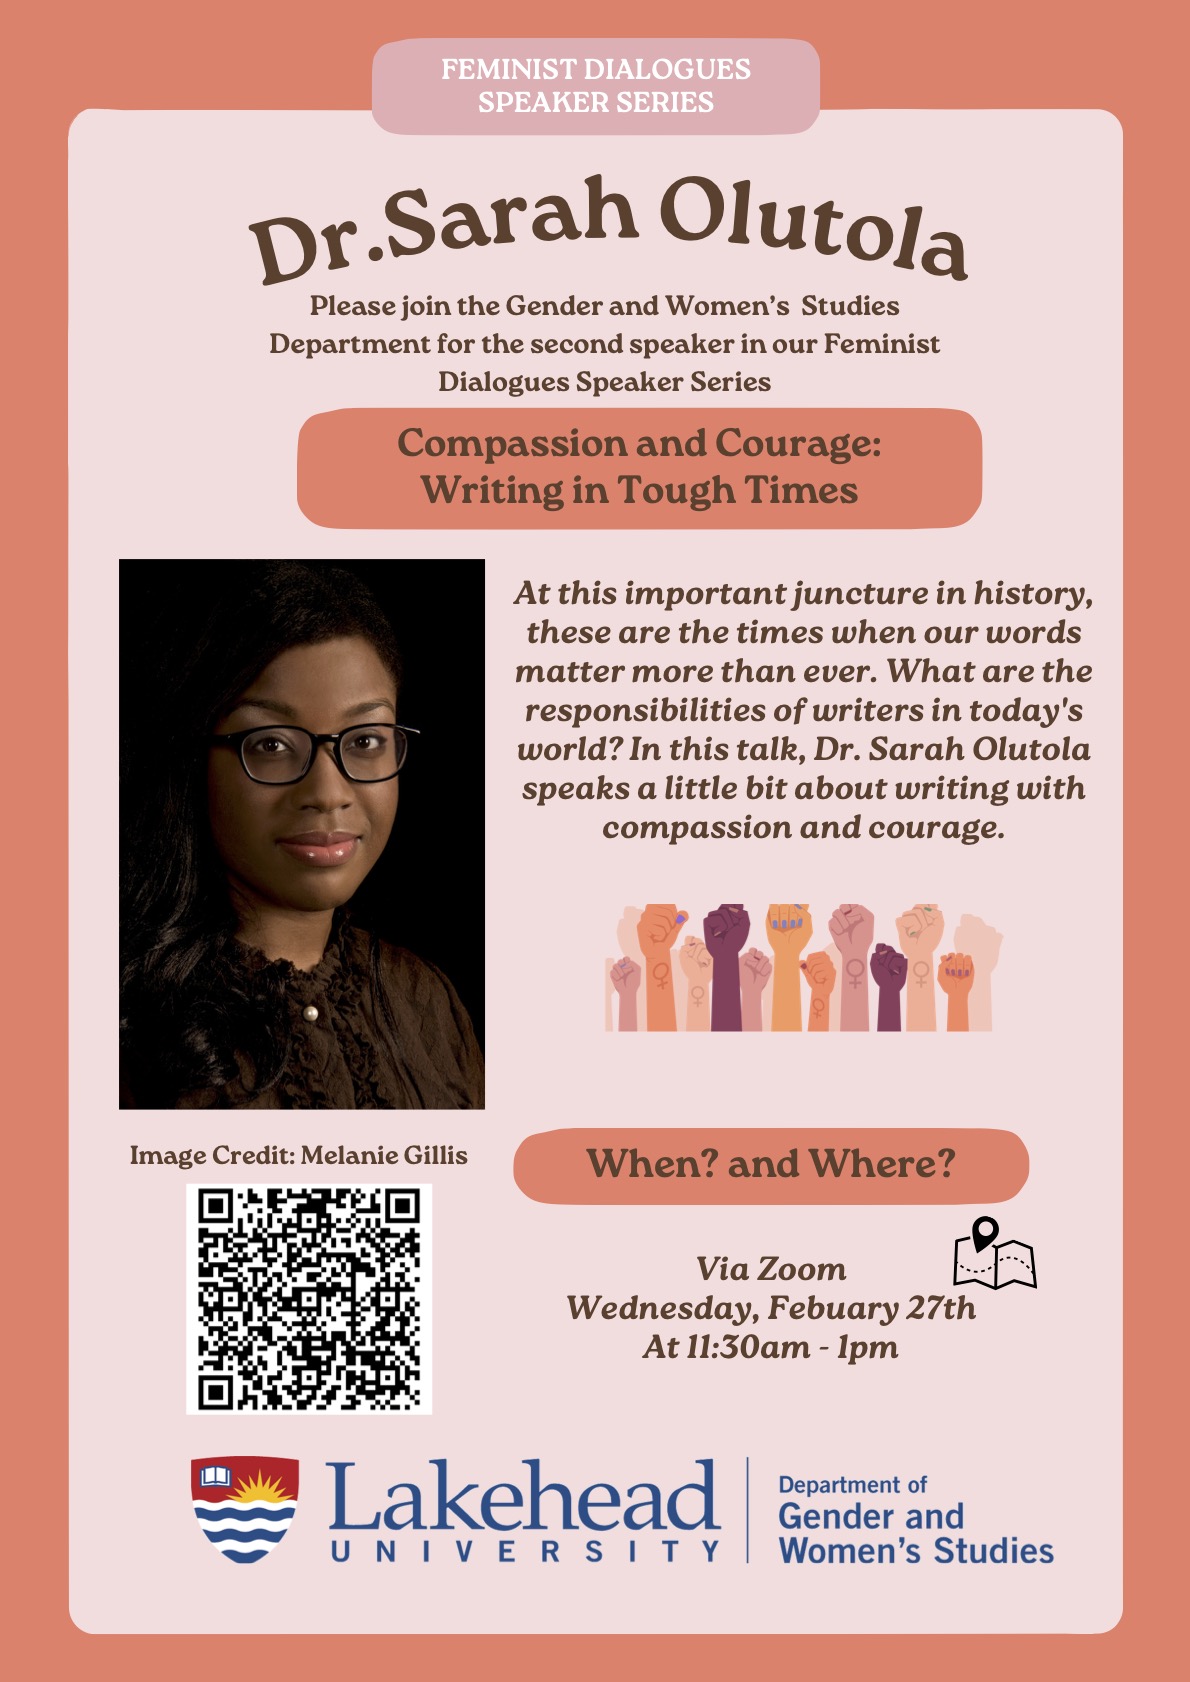 Dr. Sarah Olutola, poster contains QR code but text is provided on website details.